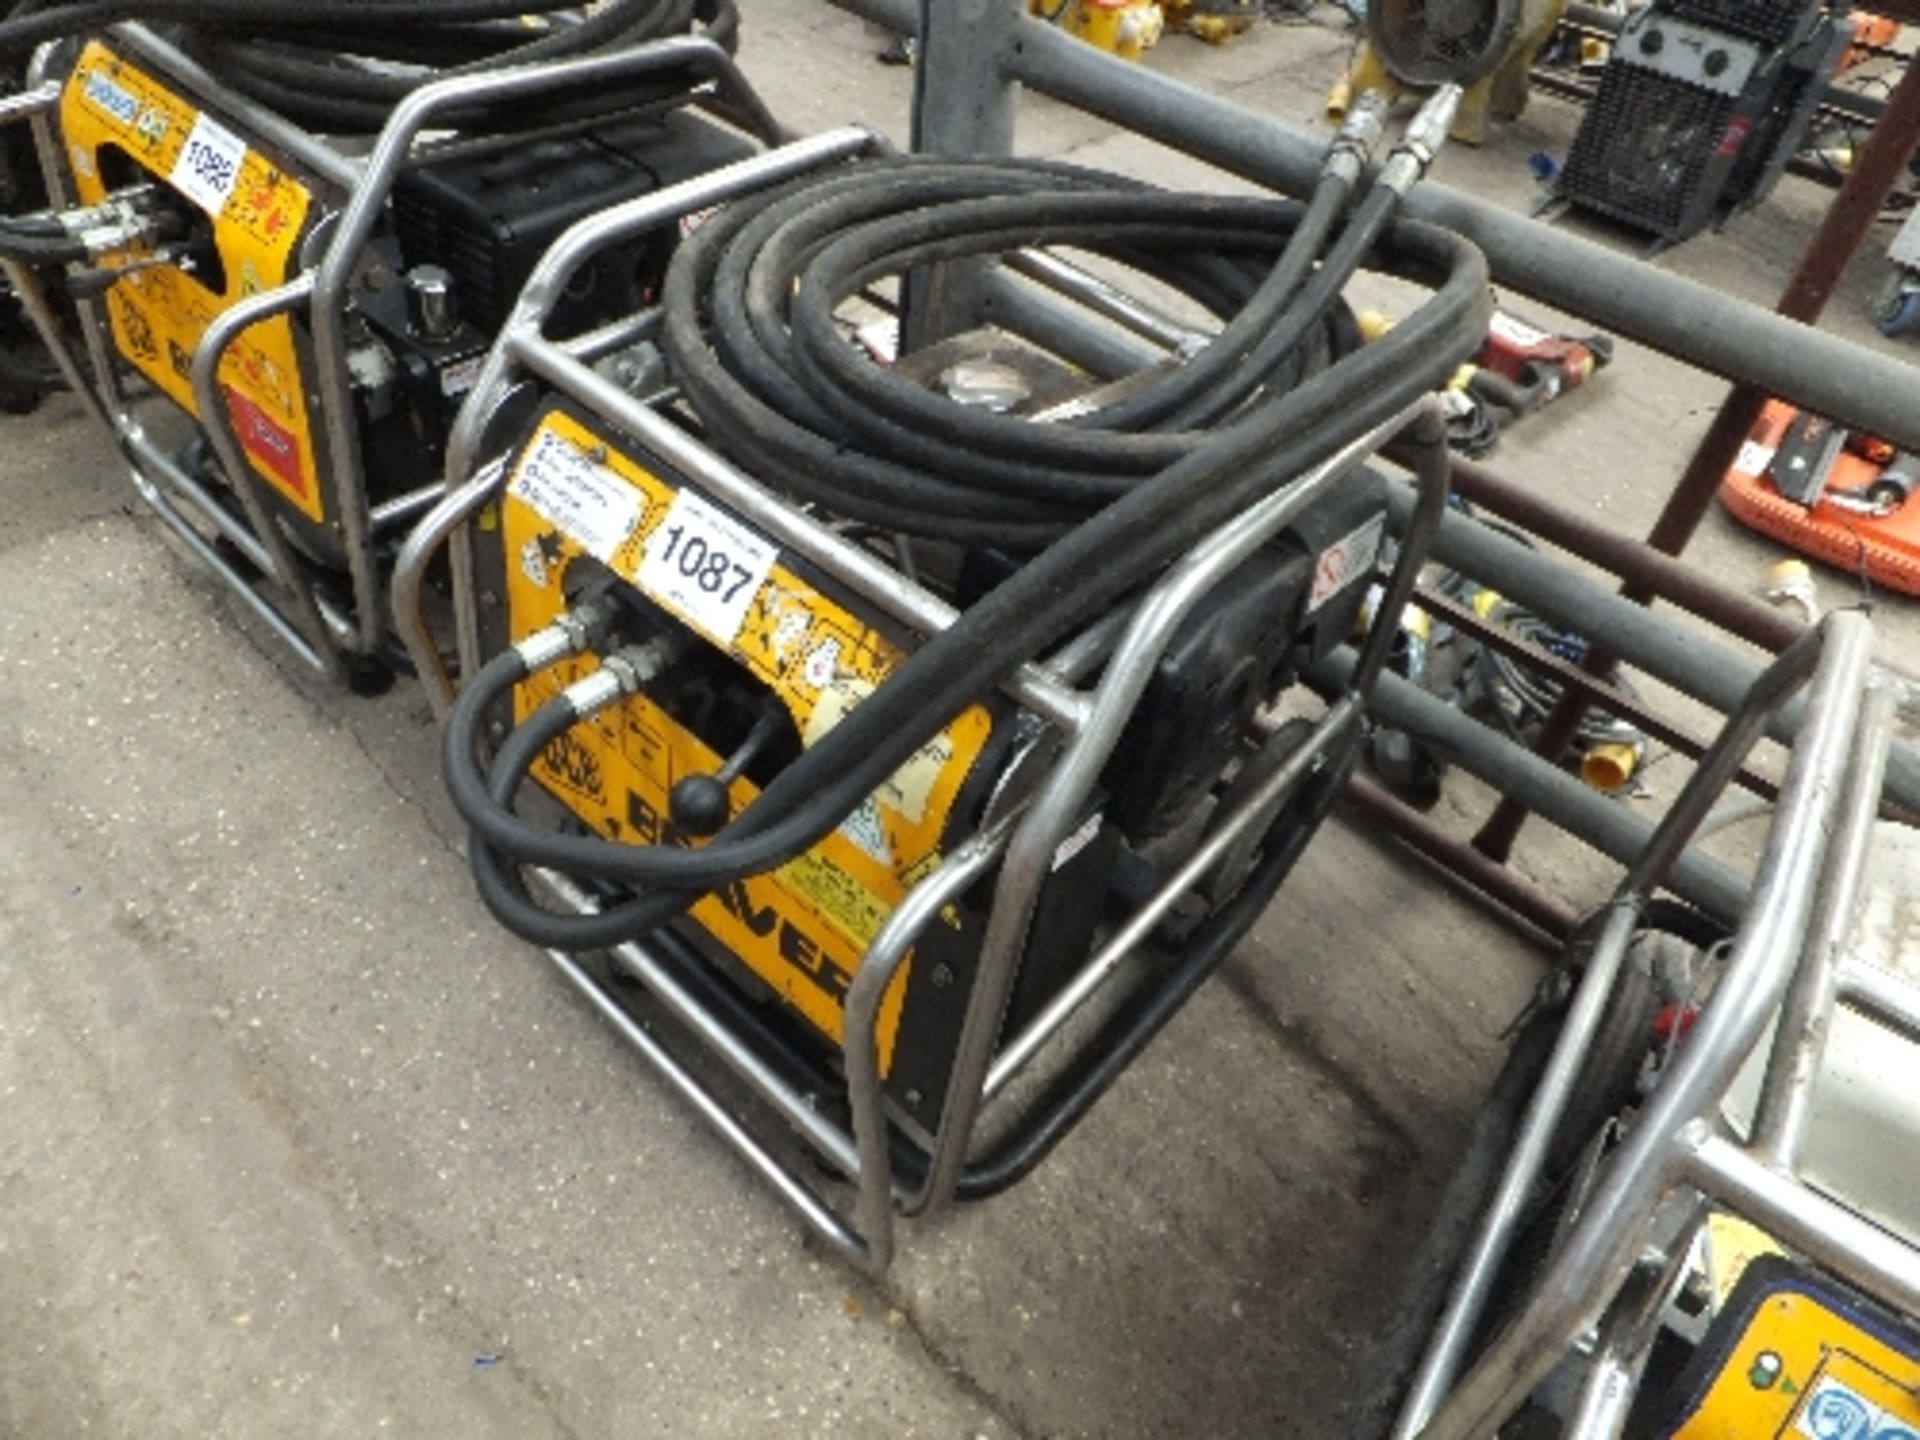 JCB power pack and hose